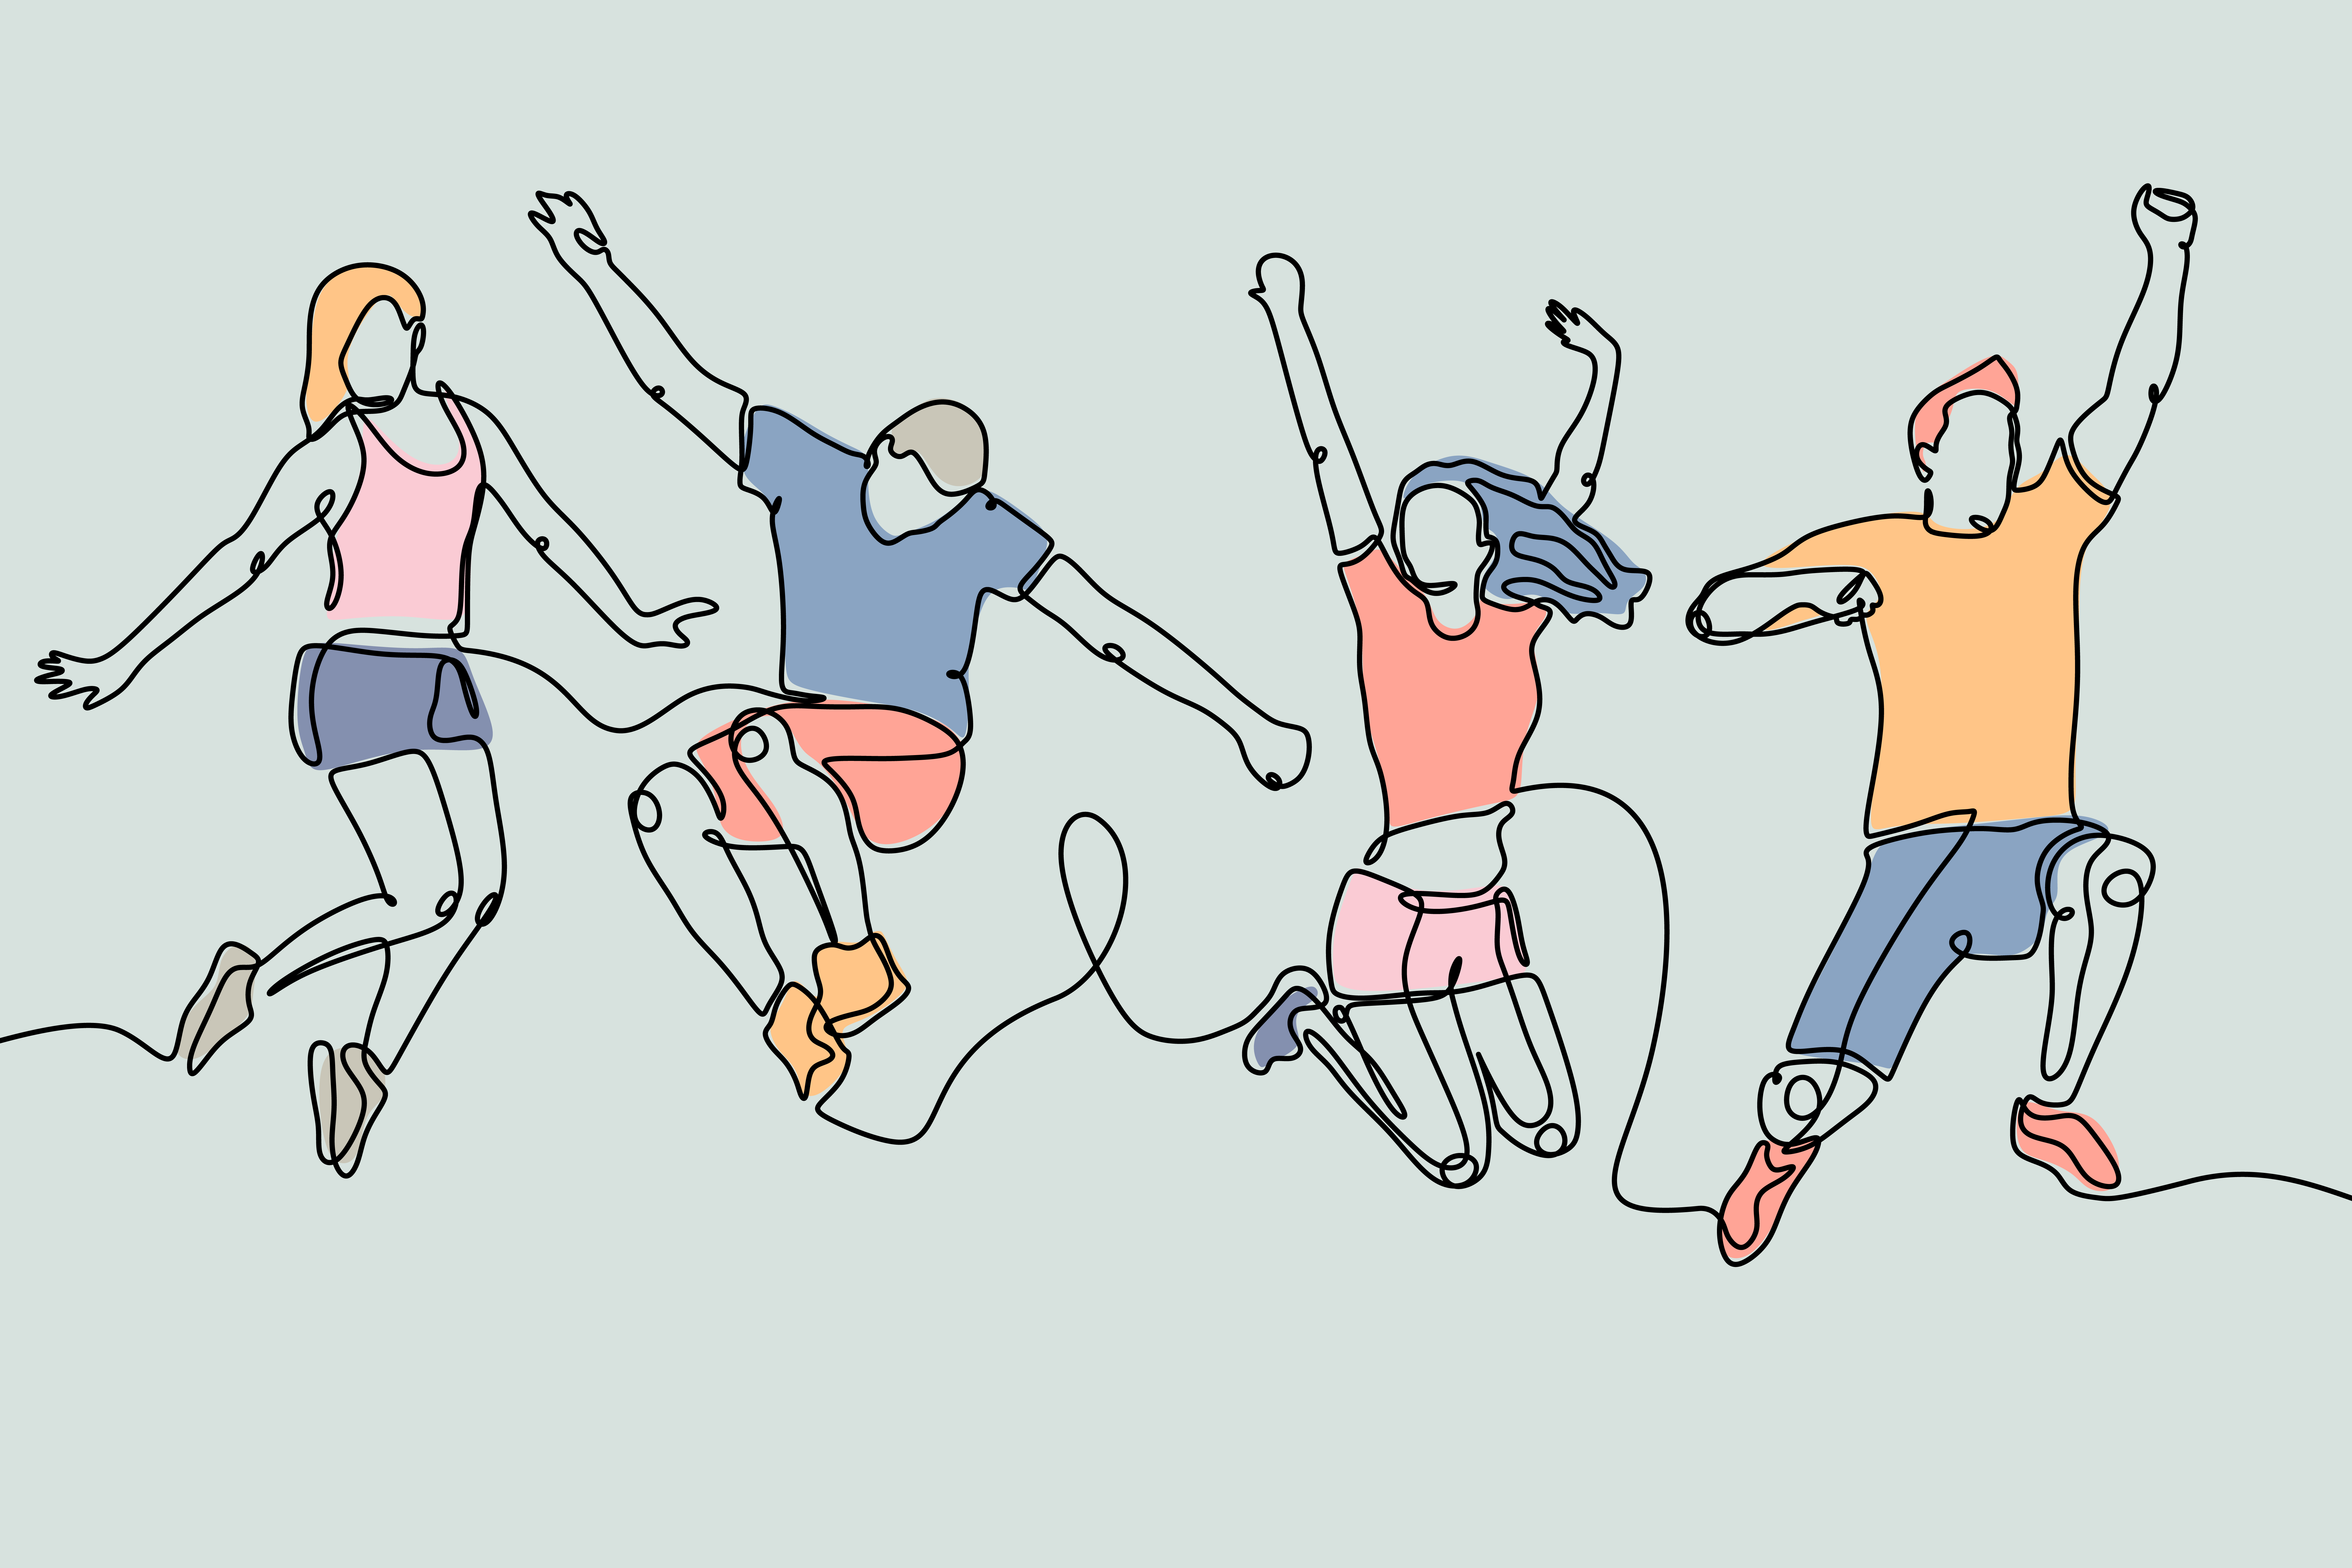 Four stylized figures drawn in a continuous line art style, representing diverse people in various dynamic jumping poses, colored in pastel shades set against a neutral background.